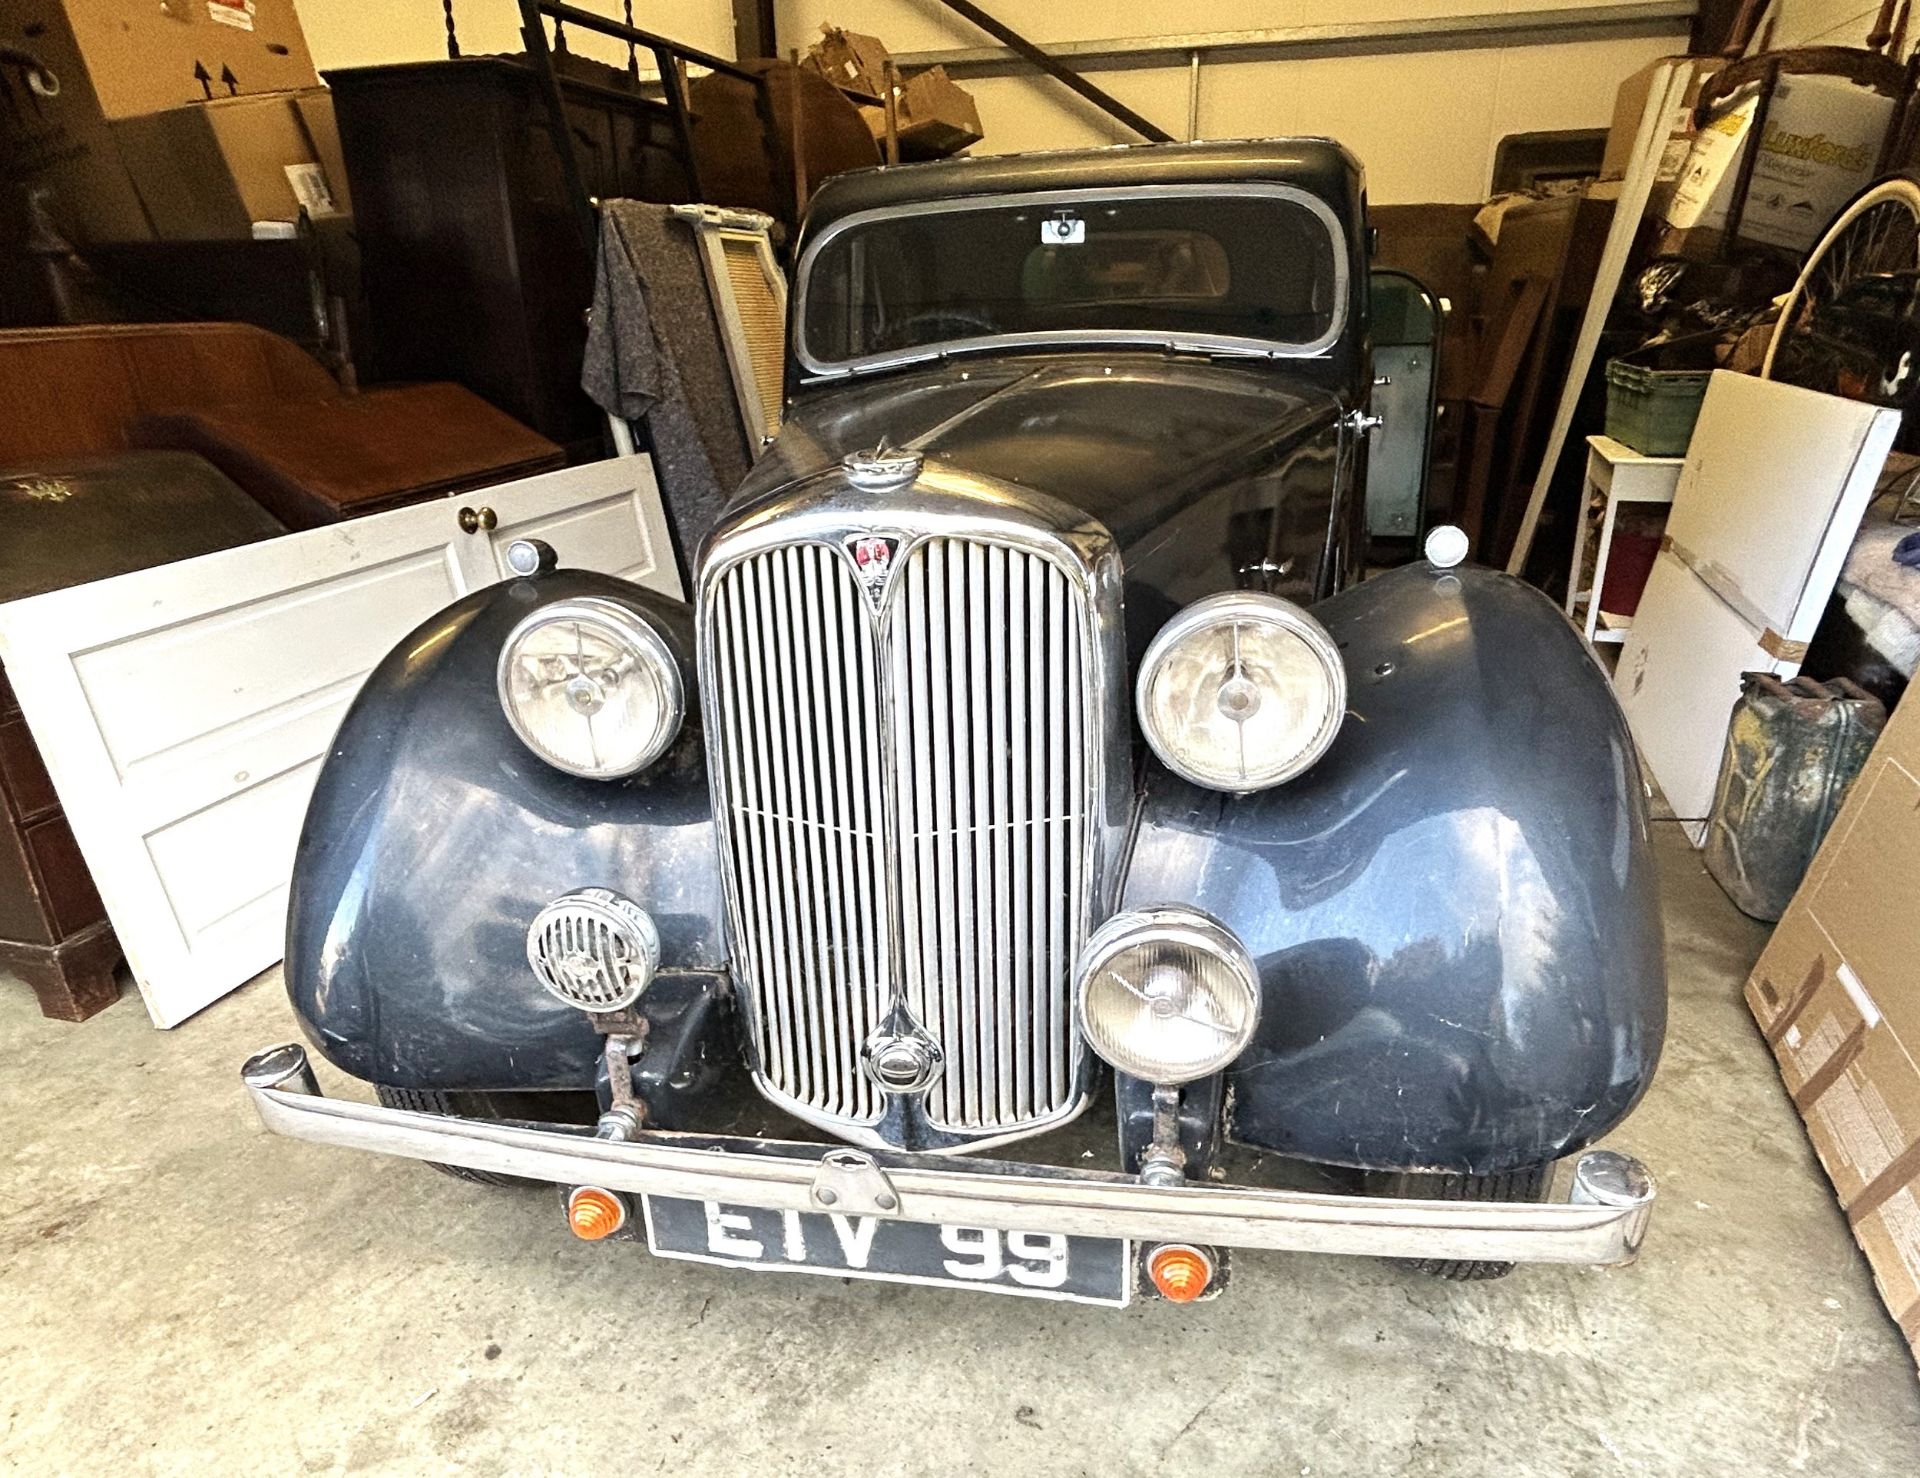 1938 ROVER 12HP SPORTS SALOON Registration Number: ETV 99 Chassis Number: 841520 Recorded Mileage: - Image 2 of 9